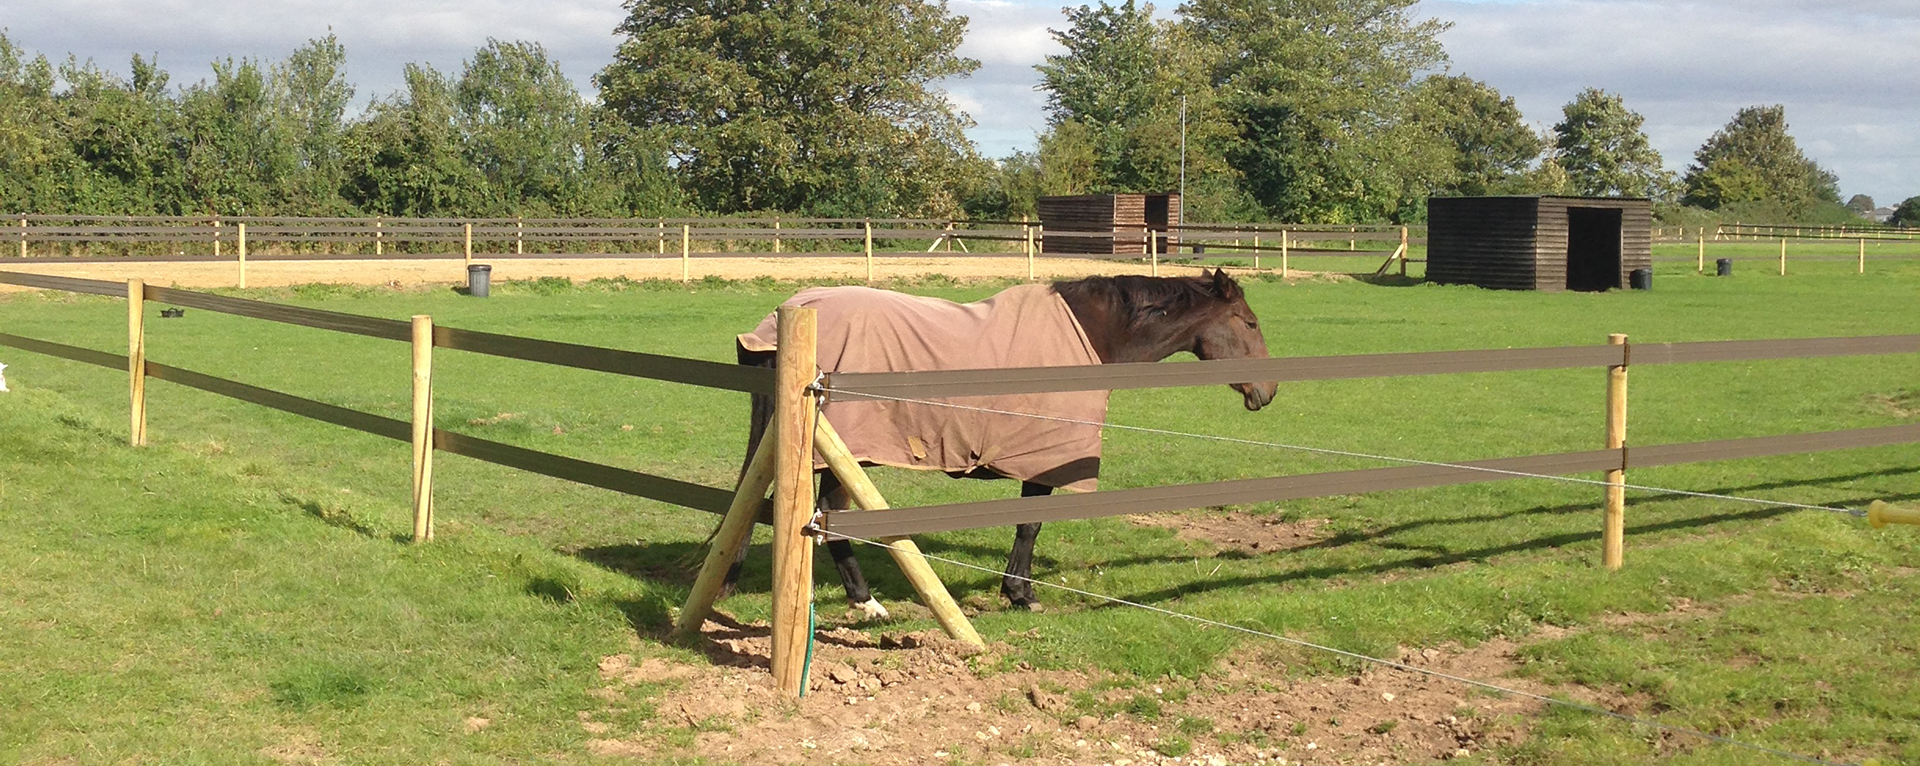 Supplying and erecting equestrian and paddock fencing.